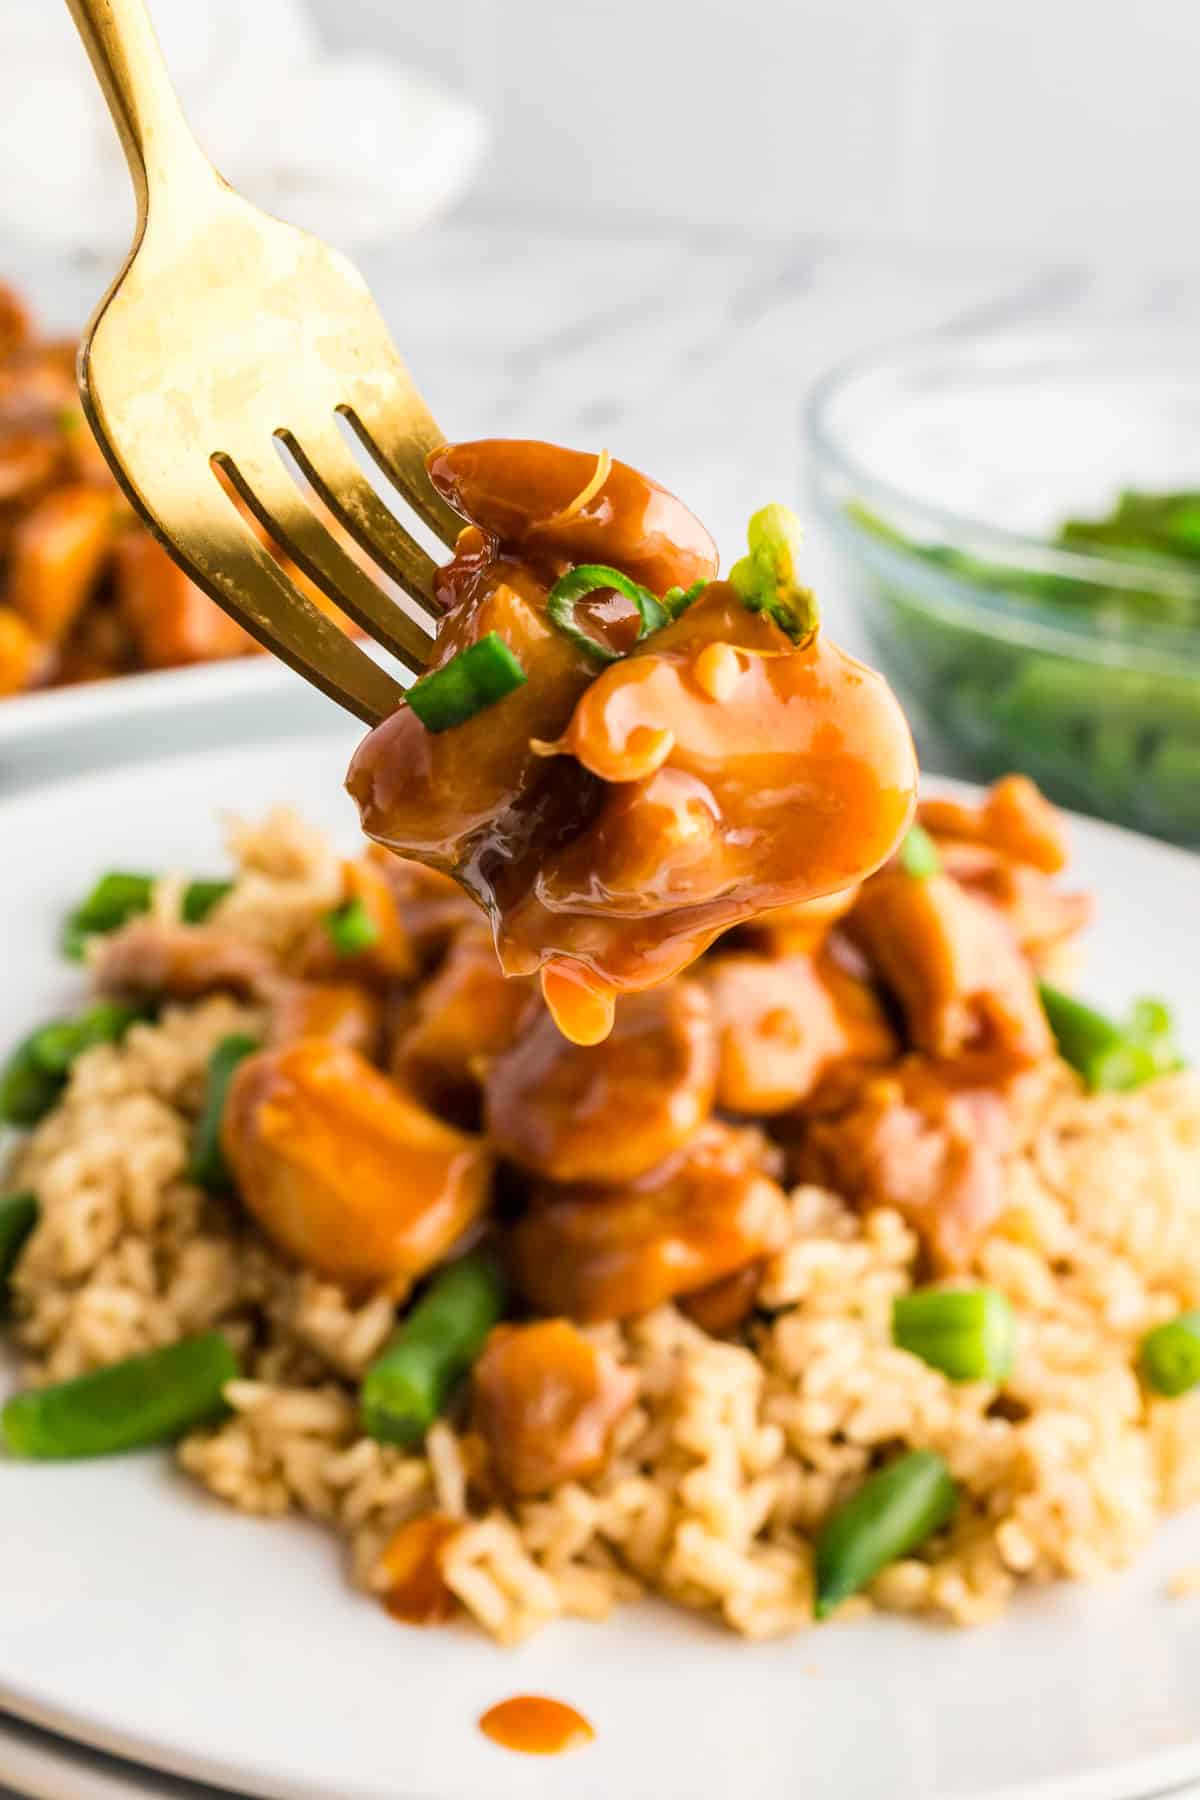 A bite shot of bourbon chicken over brown rice with green beans and garnished with green onions.